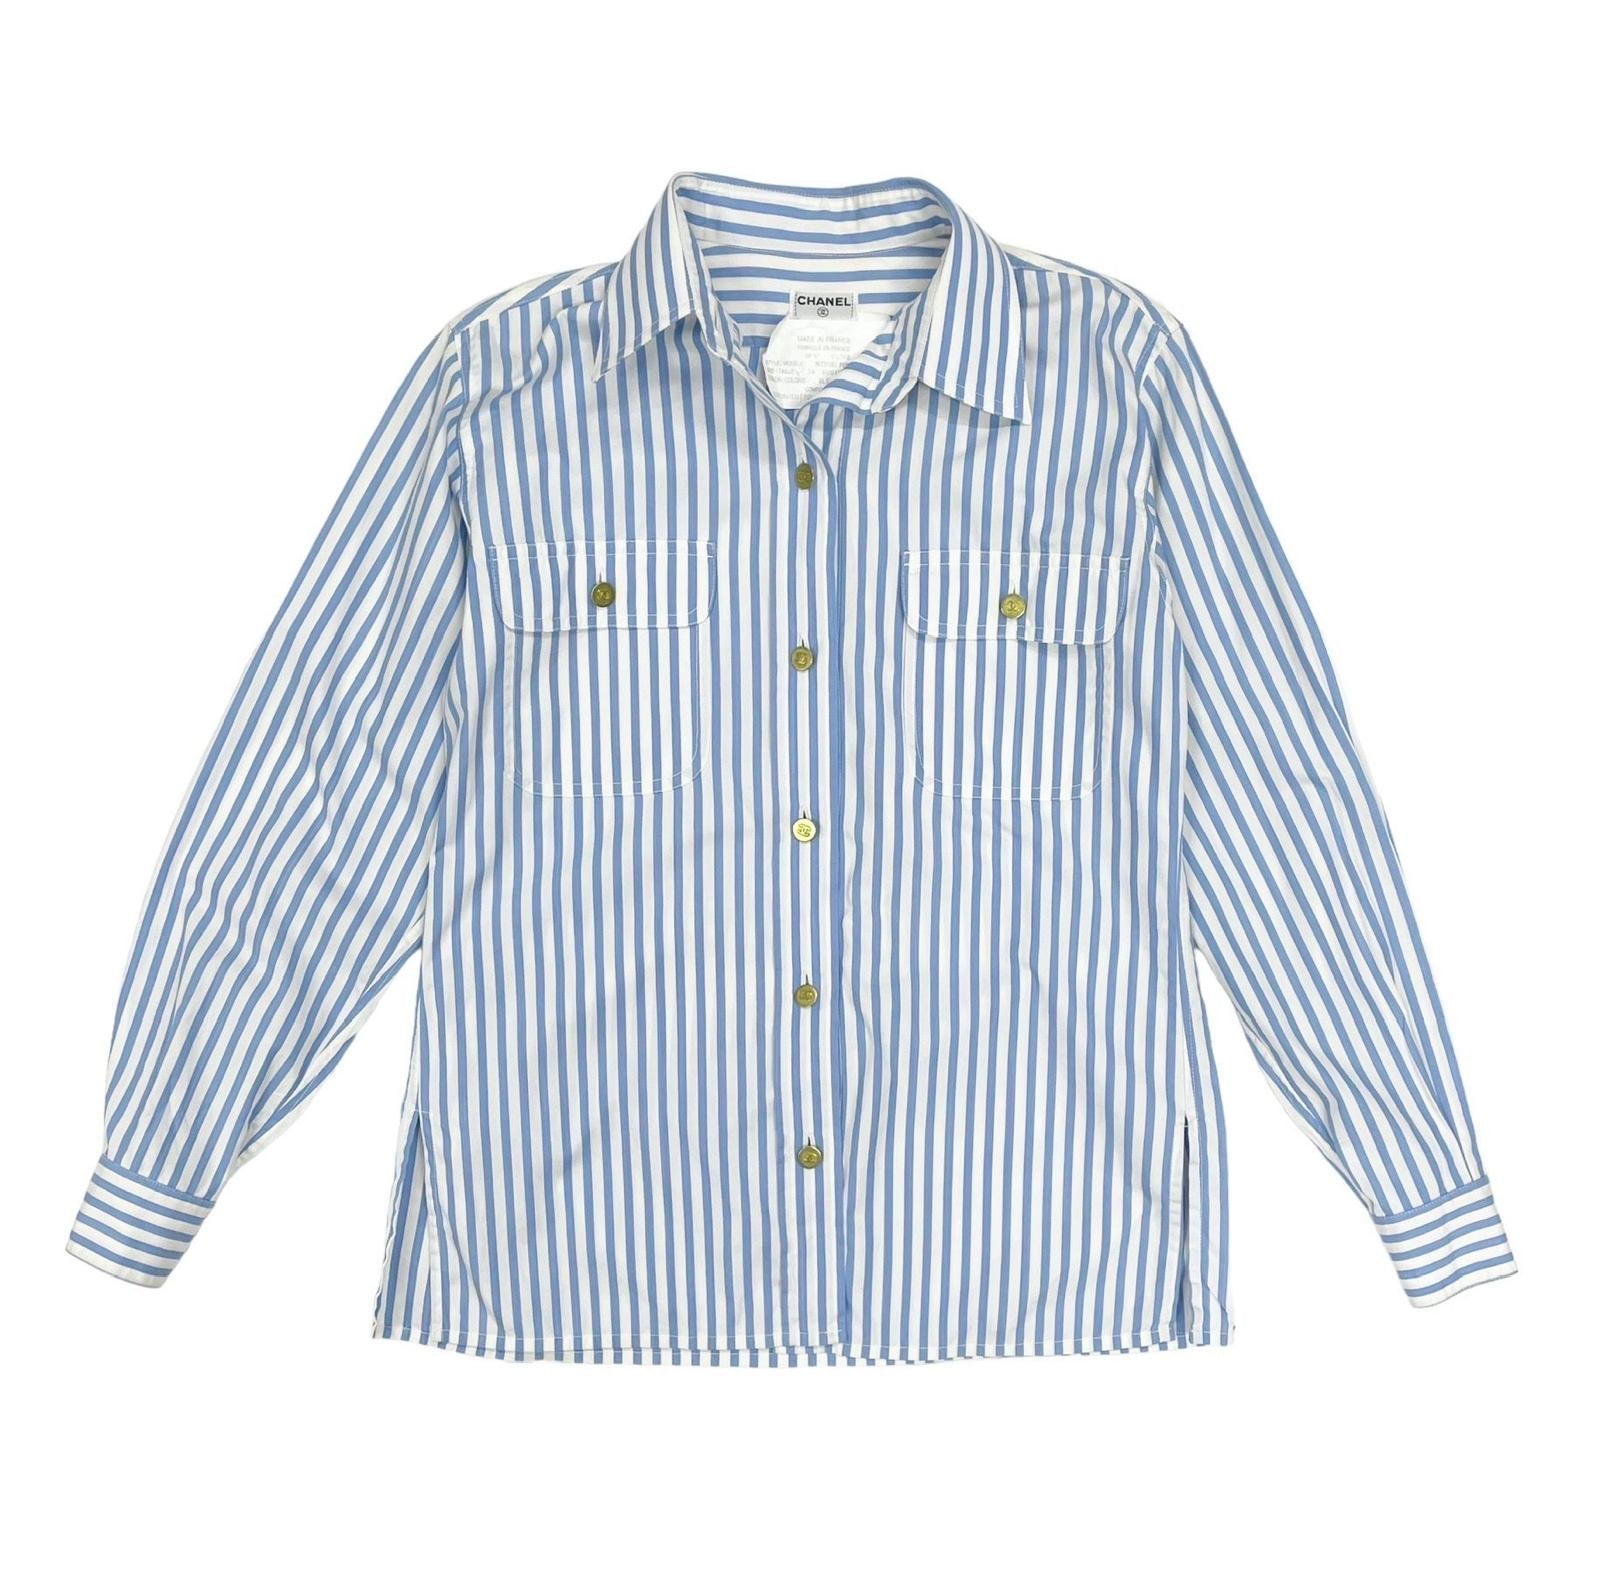 Treasures of NYC - Chanel Light Blue Stripe Oversize Button